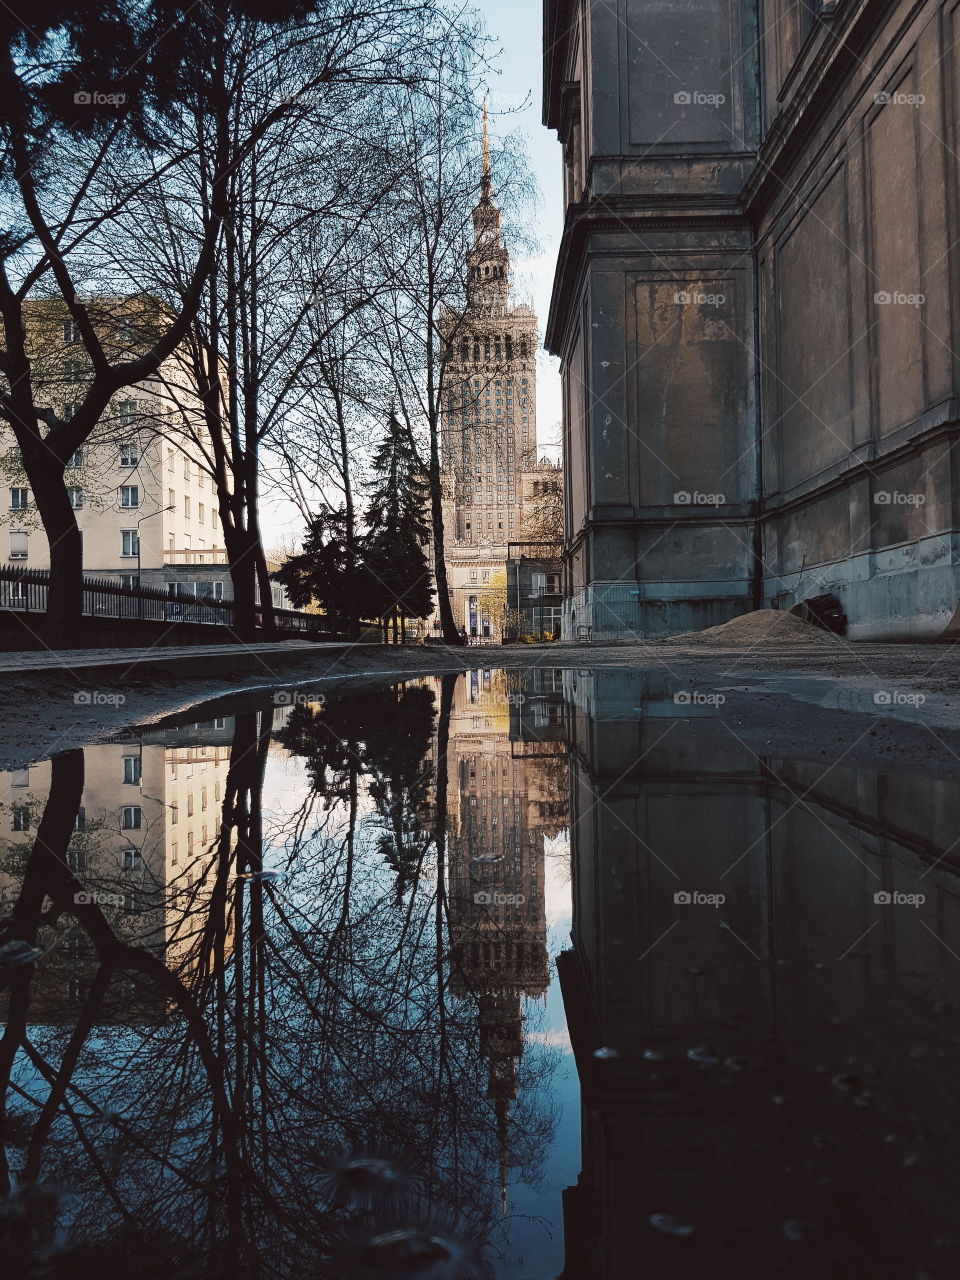 Palace of Culture and Science reflection in a puddle.